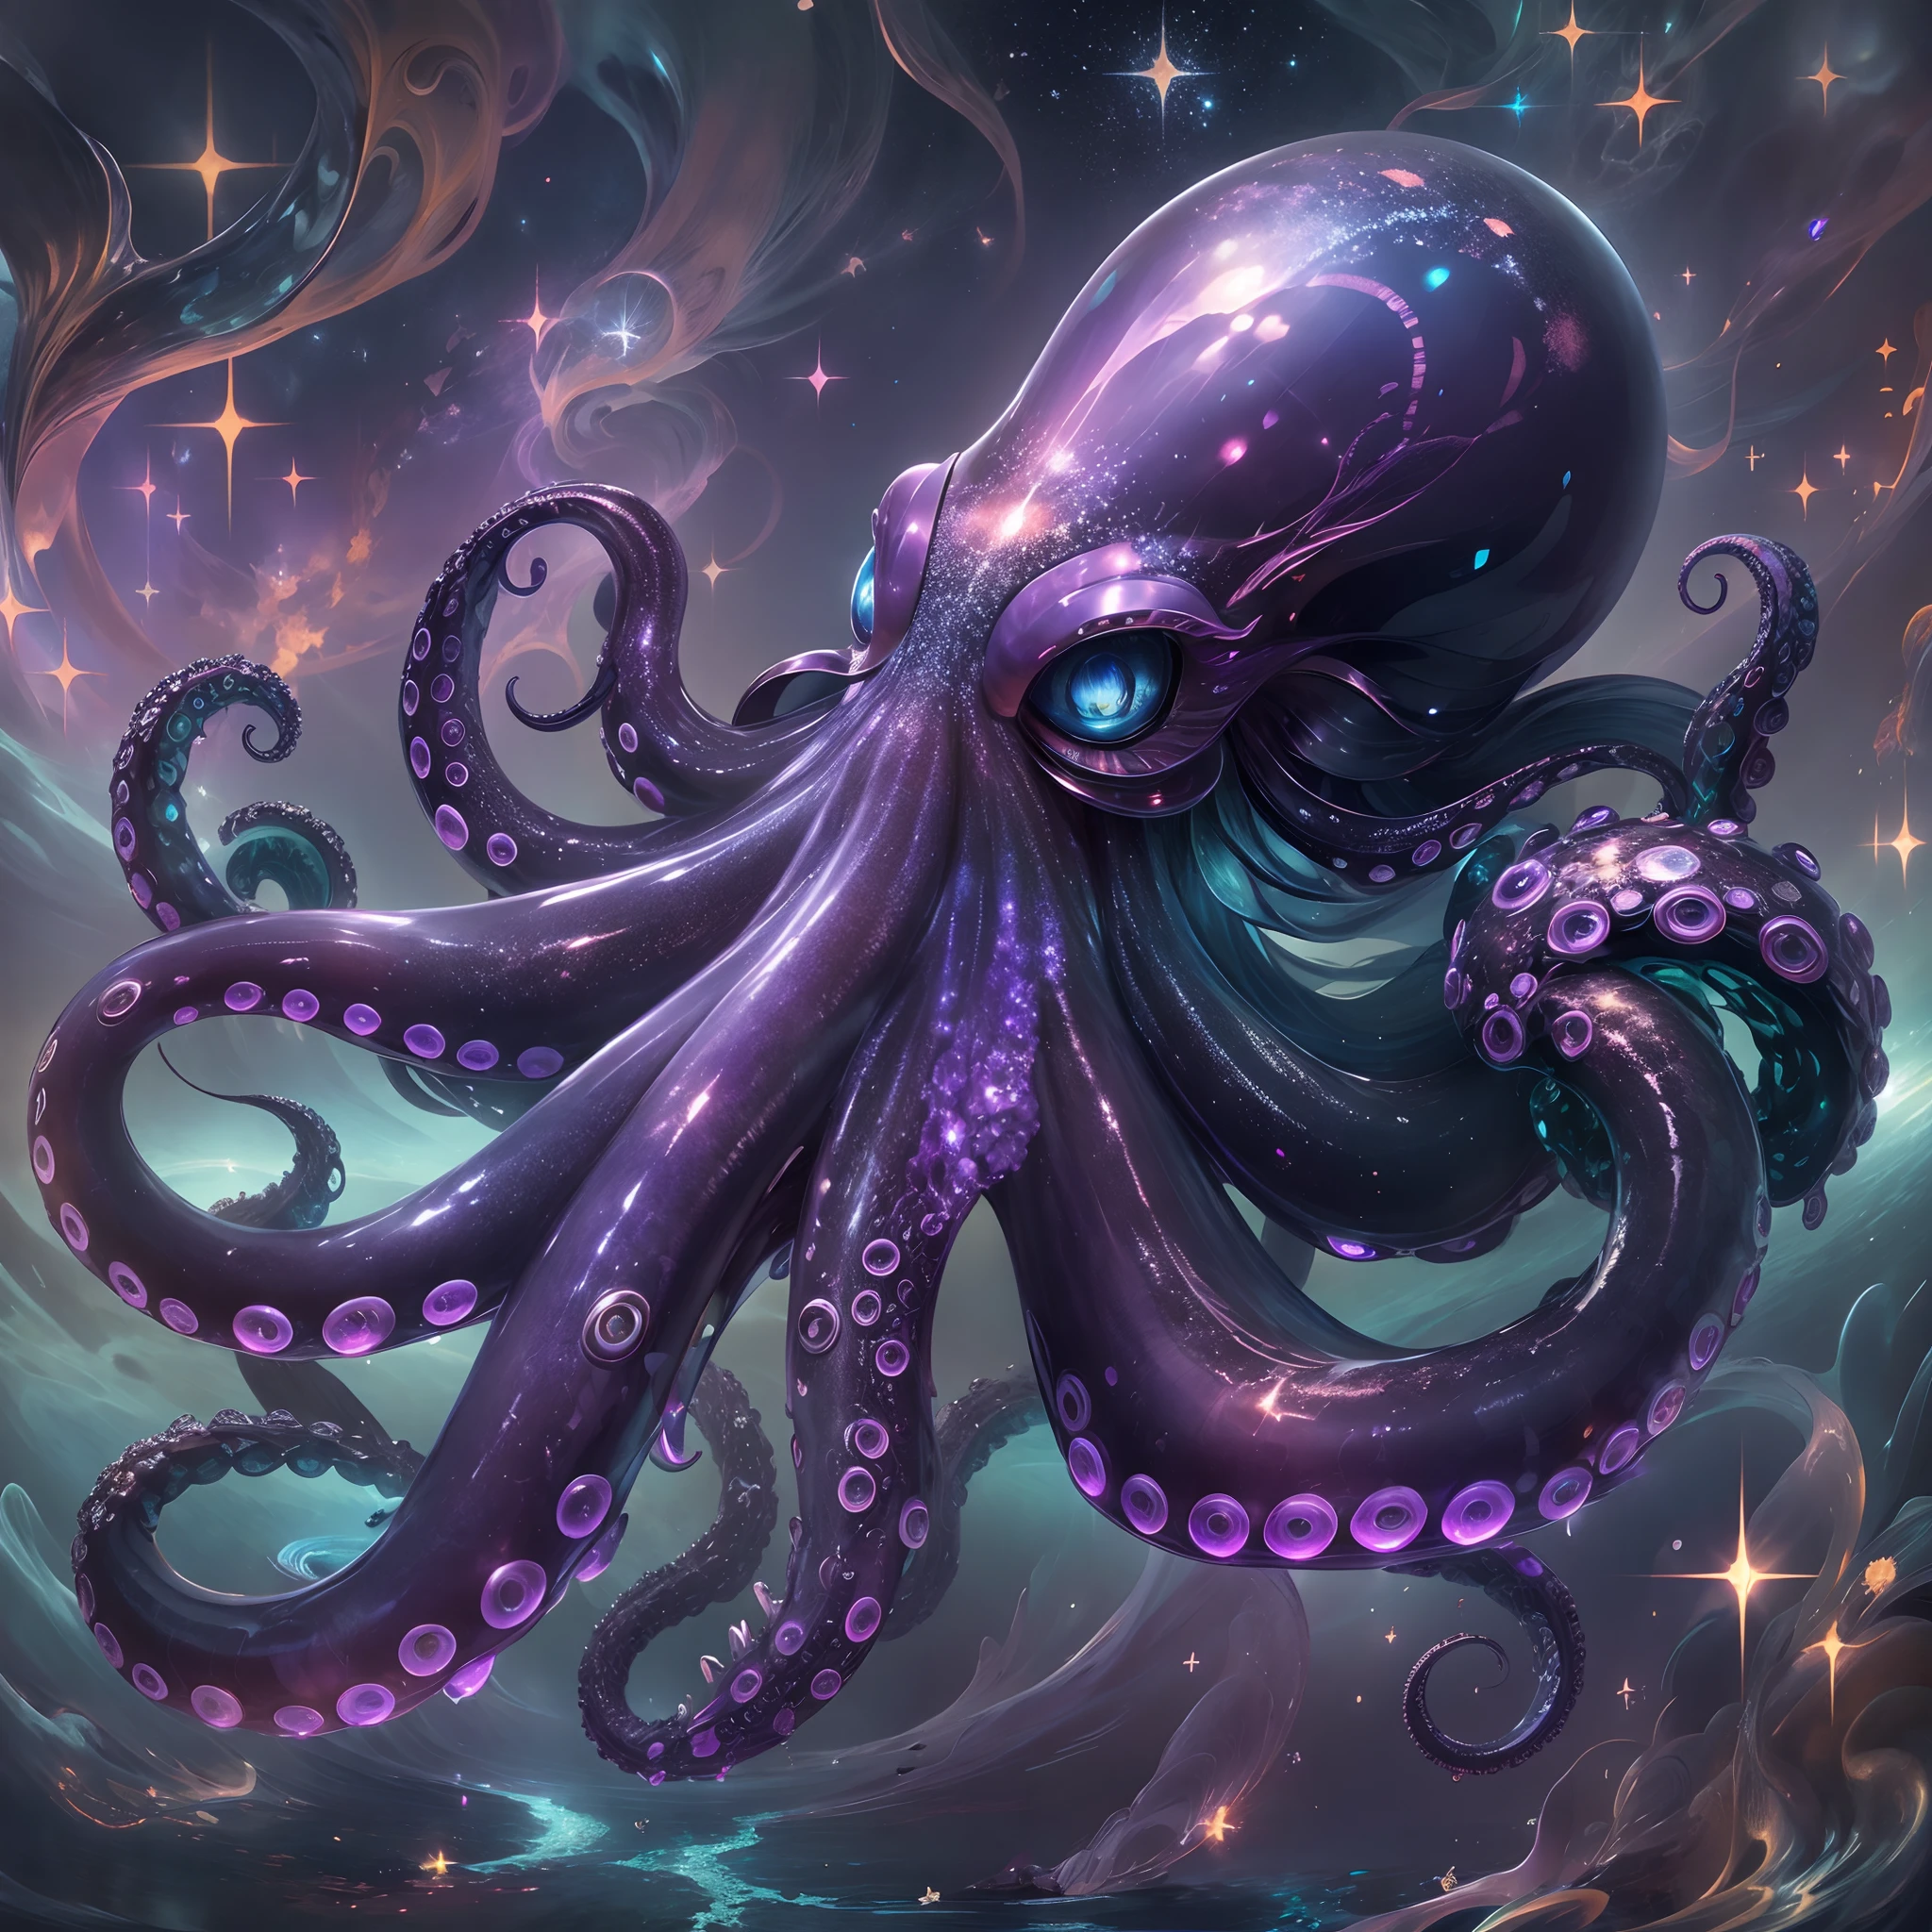 Masterpiece, Best quality, the wallpaper, Endless space,purpleish color，（Glass octopus），Cthulhu，terroral，unholy，on the sky，starlights。